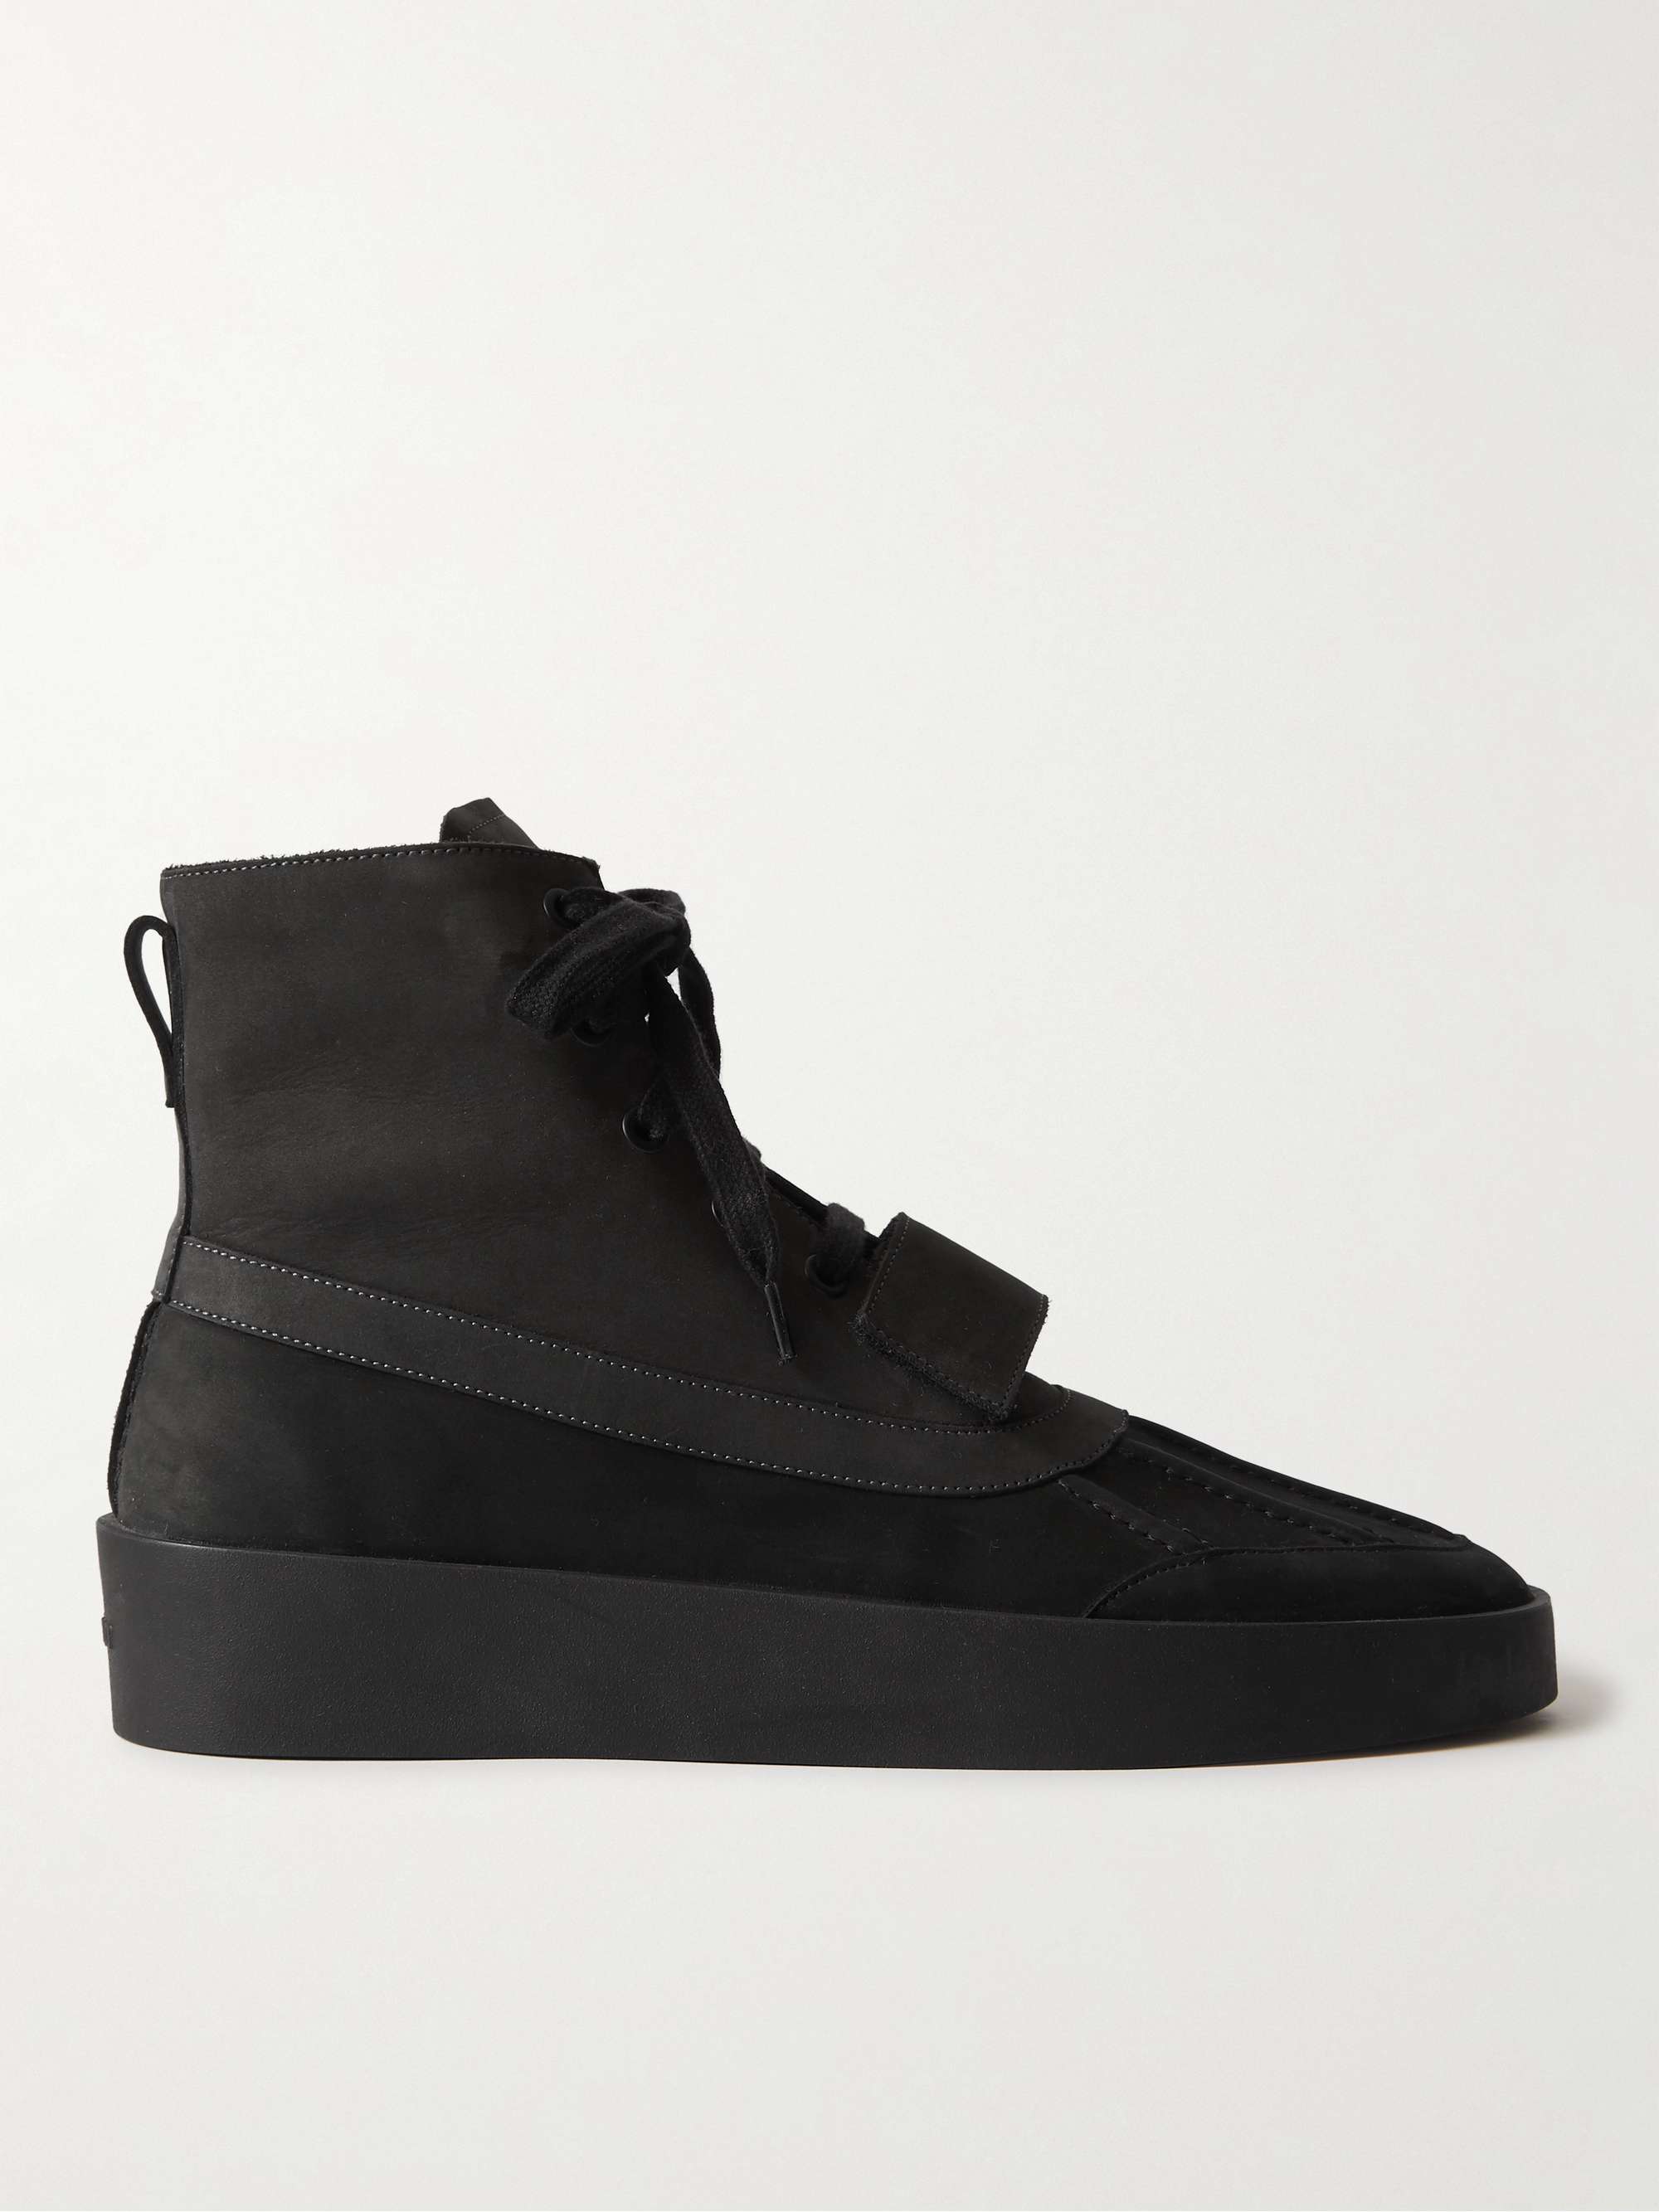 FEAR OF GOD Panelled Nubuck Duck Boots